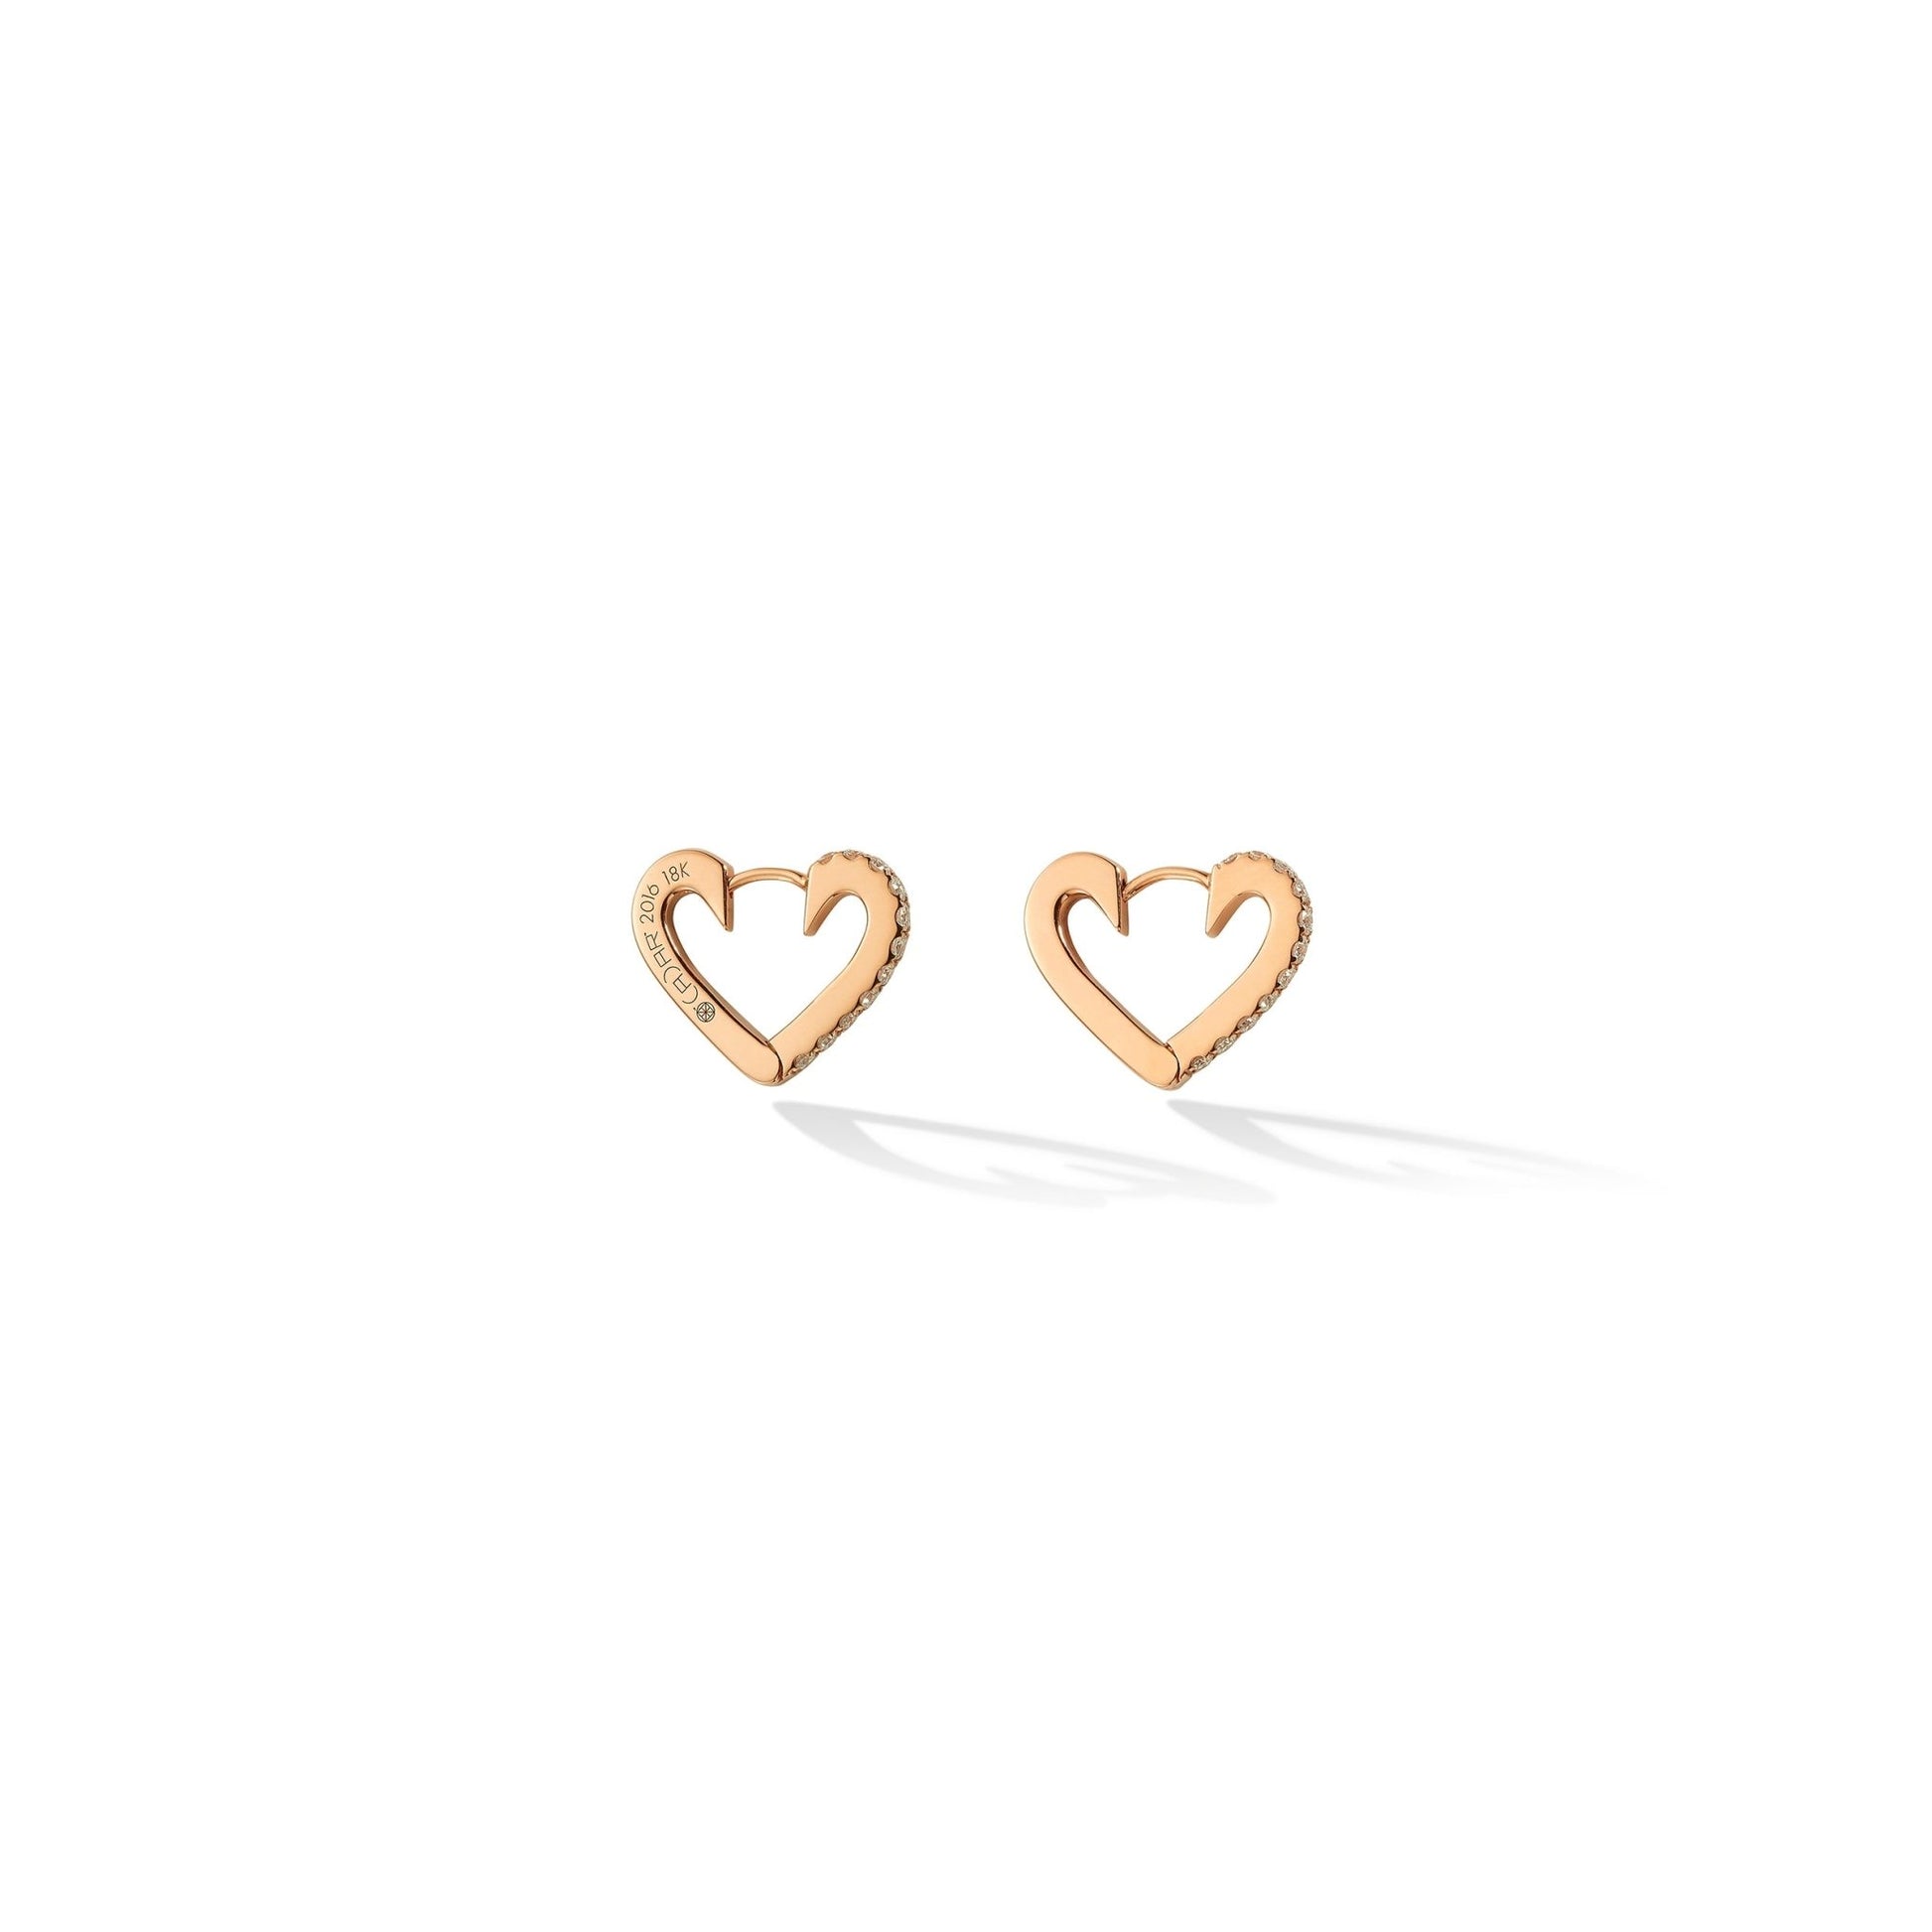 Small Rose Gold Endless Hoop Earrings with White Diamonds - Cadar